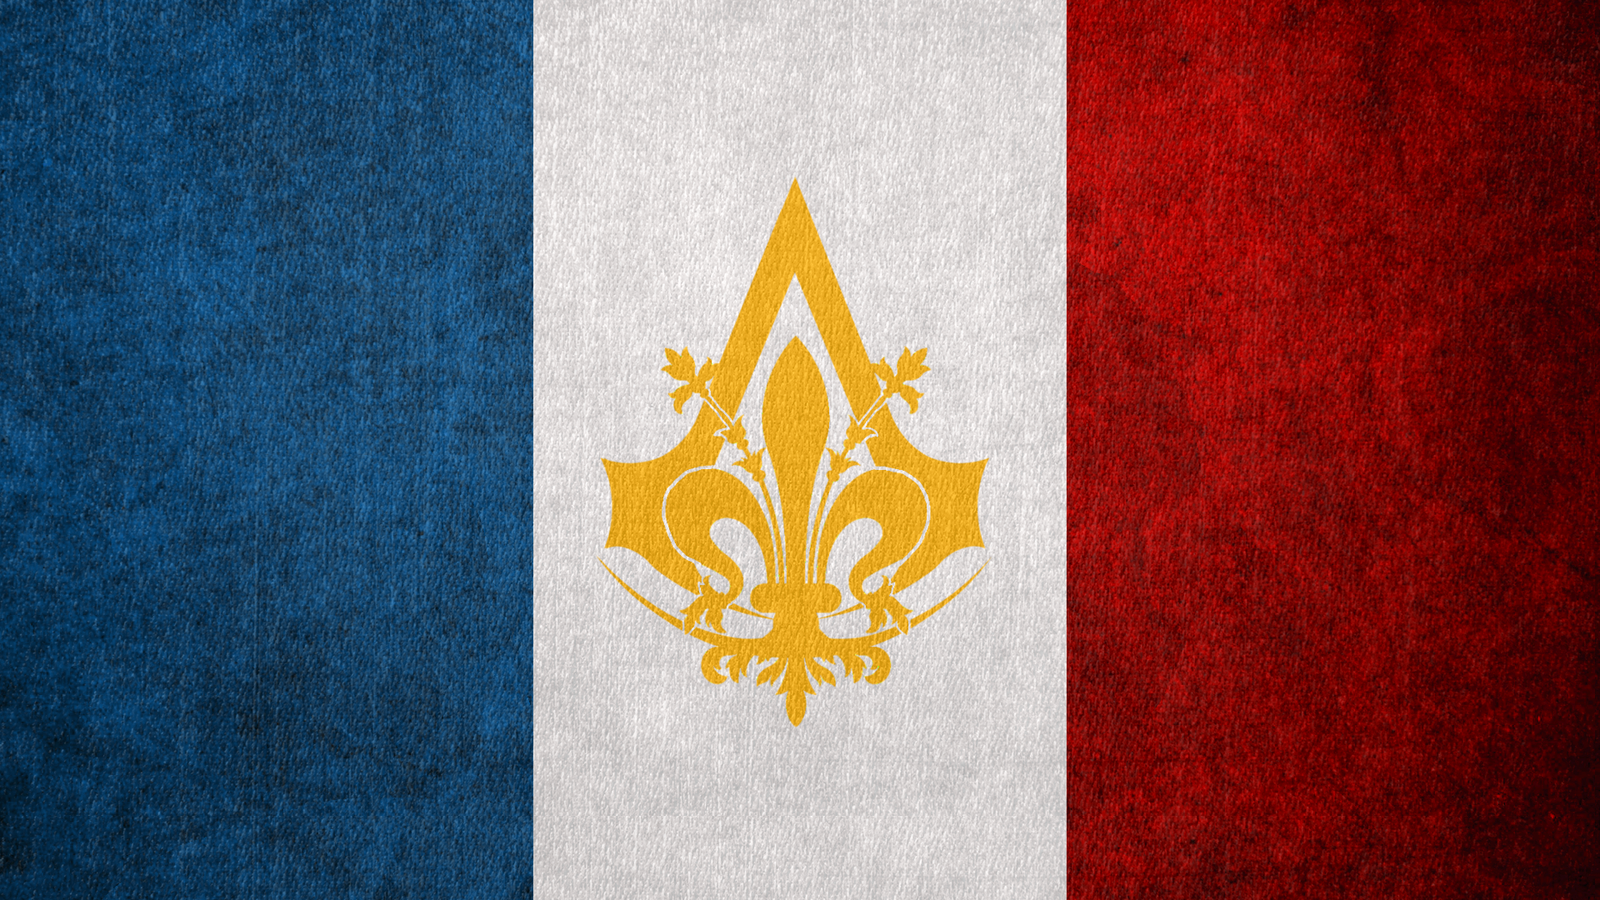 Assassin's Creed: French Revolutionary Flag. Assassin's creed wallpaper, Assassins creed unity arno, Assassins creed